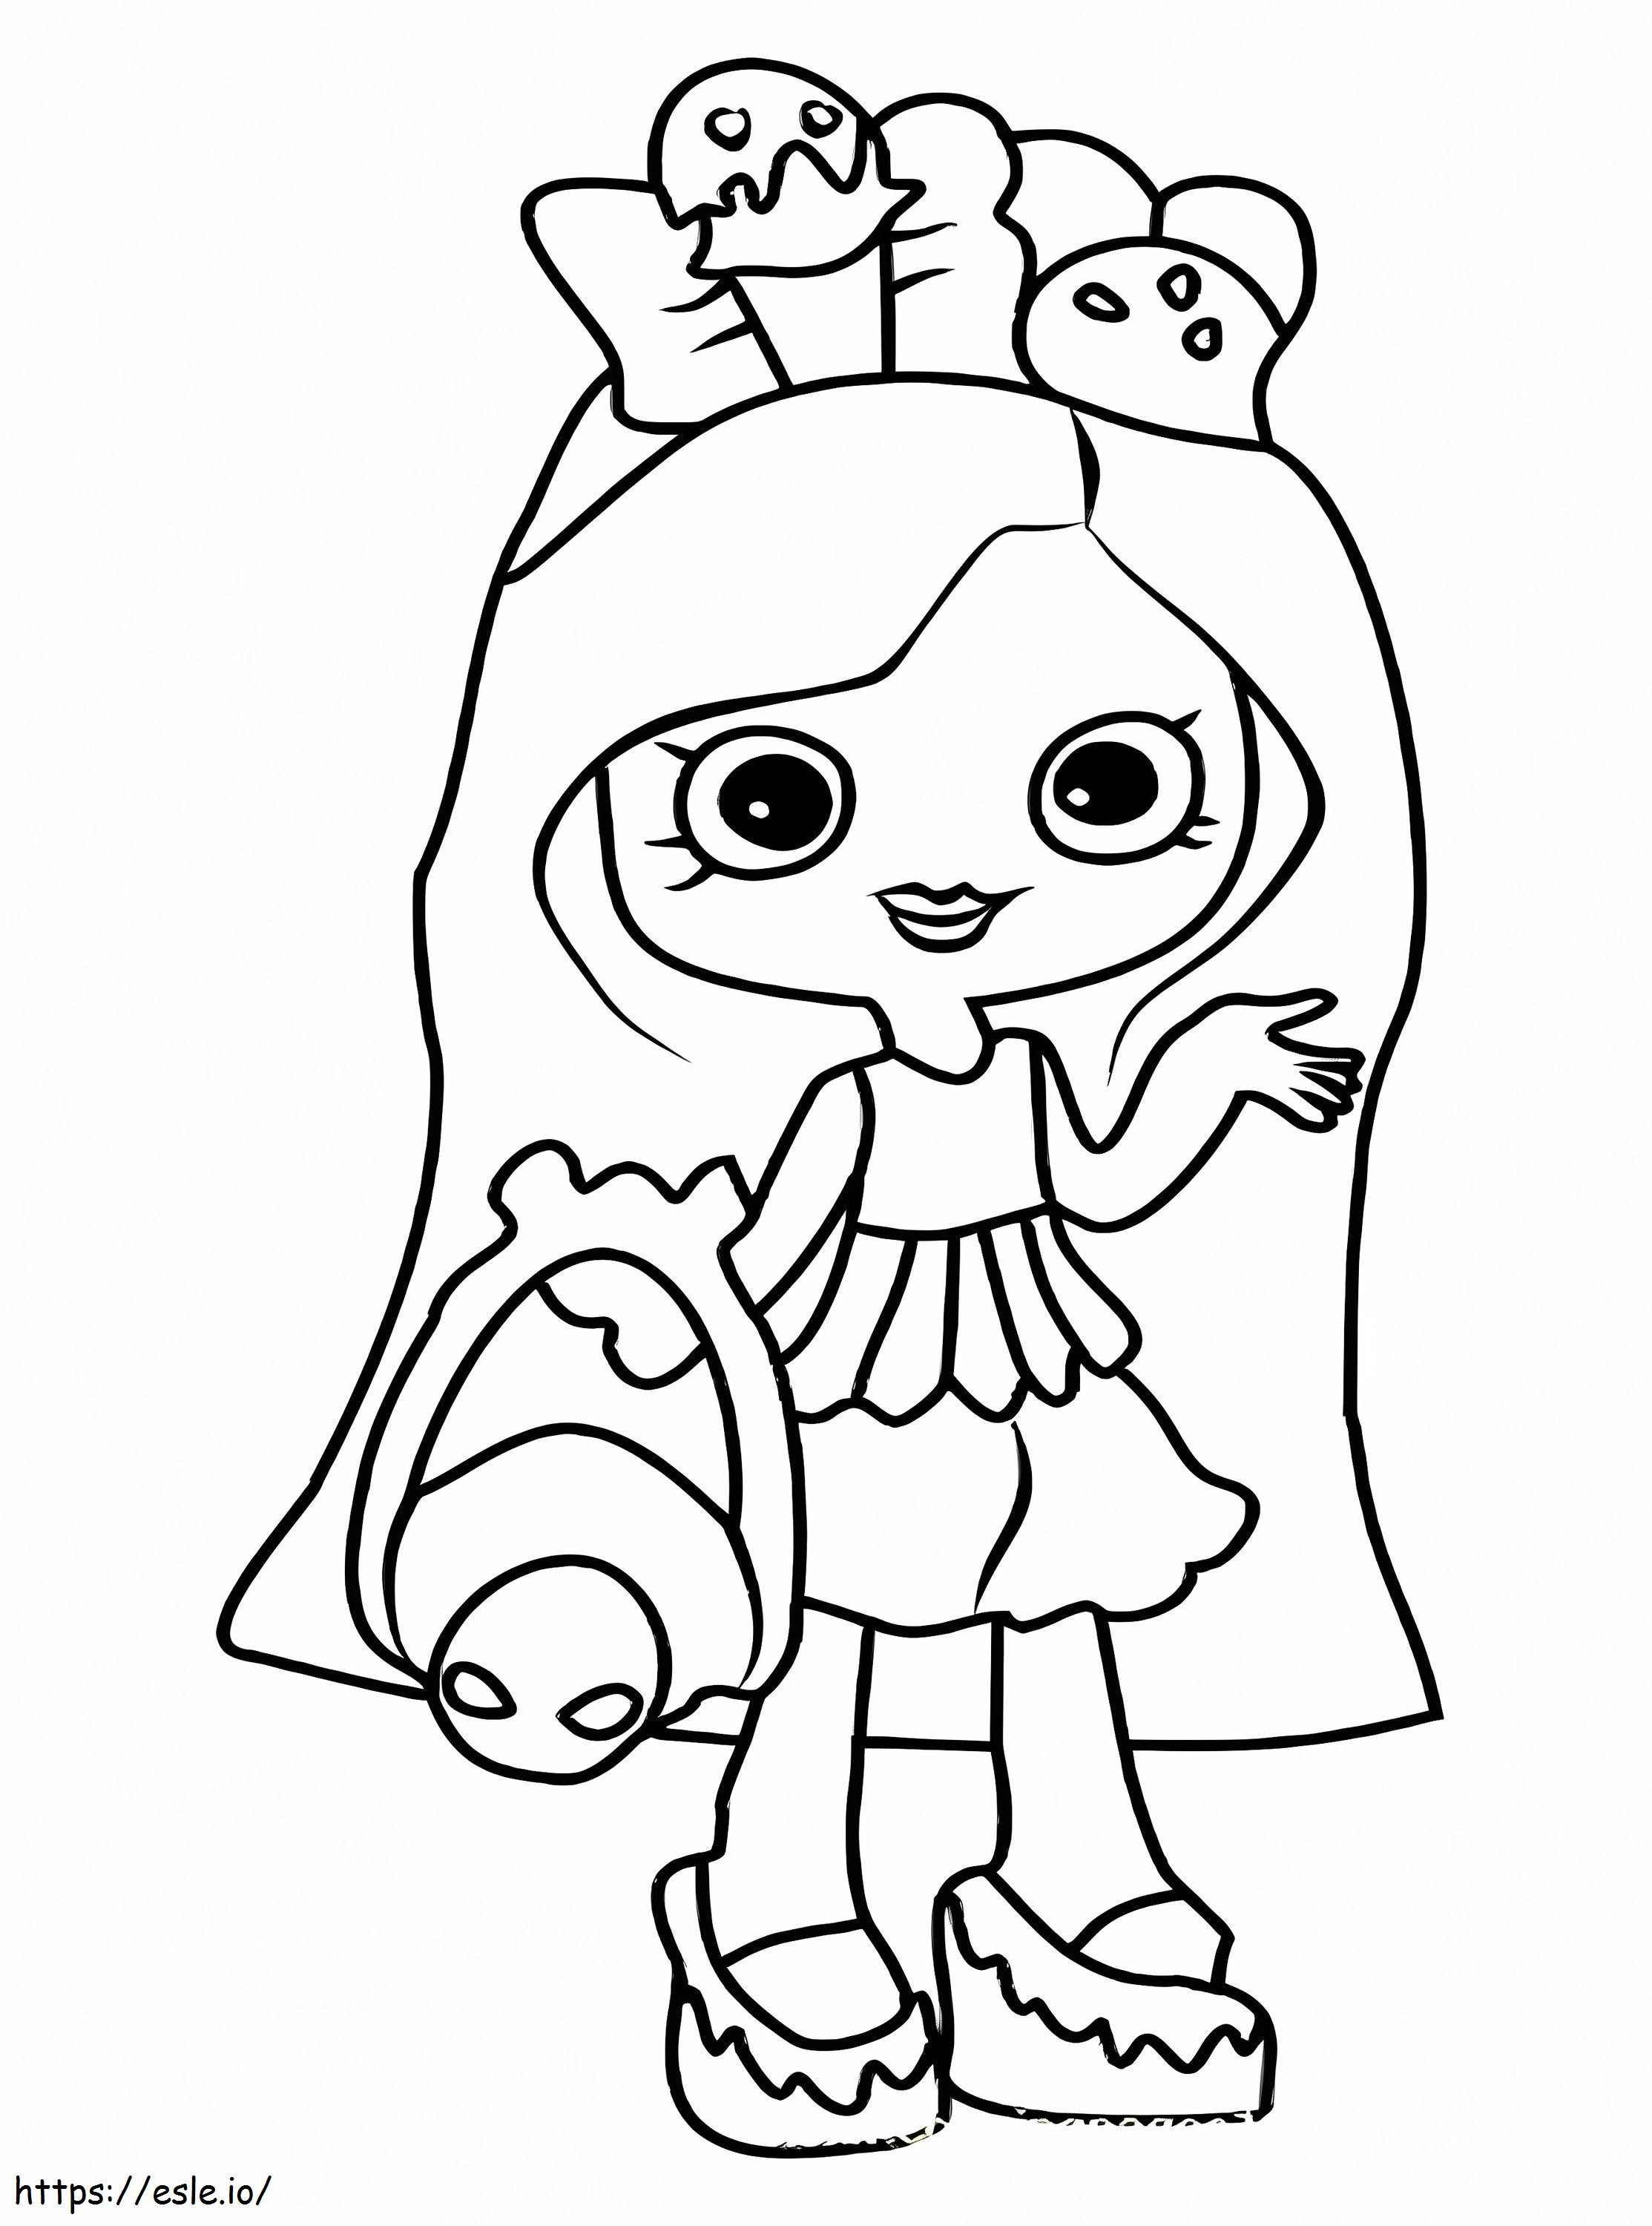 Baby Peppa As Shopkins coloring page